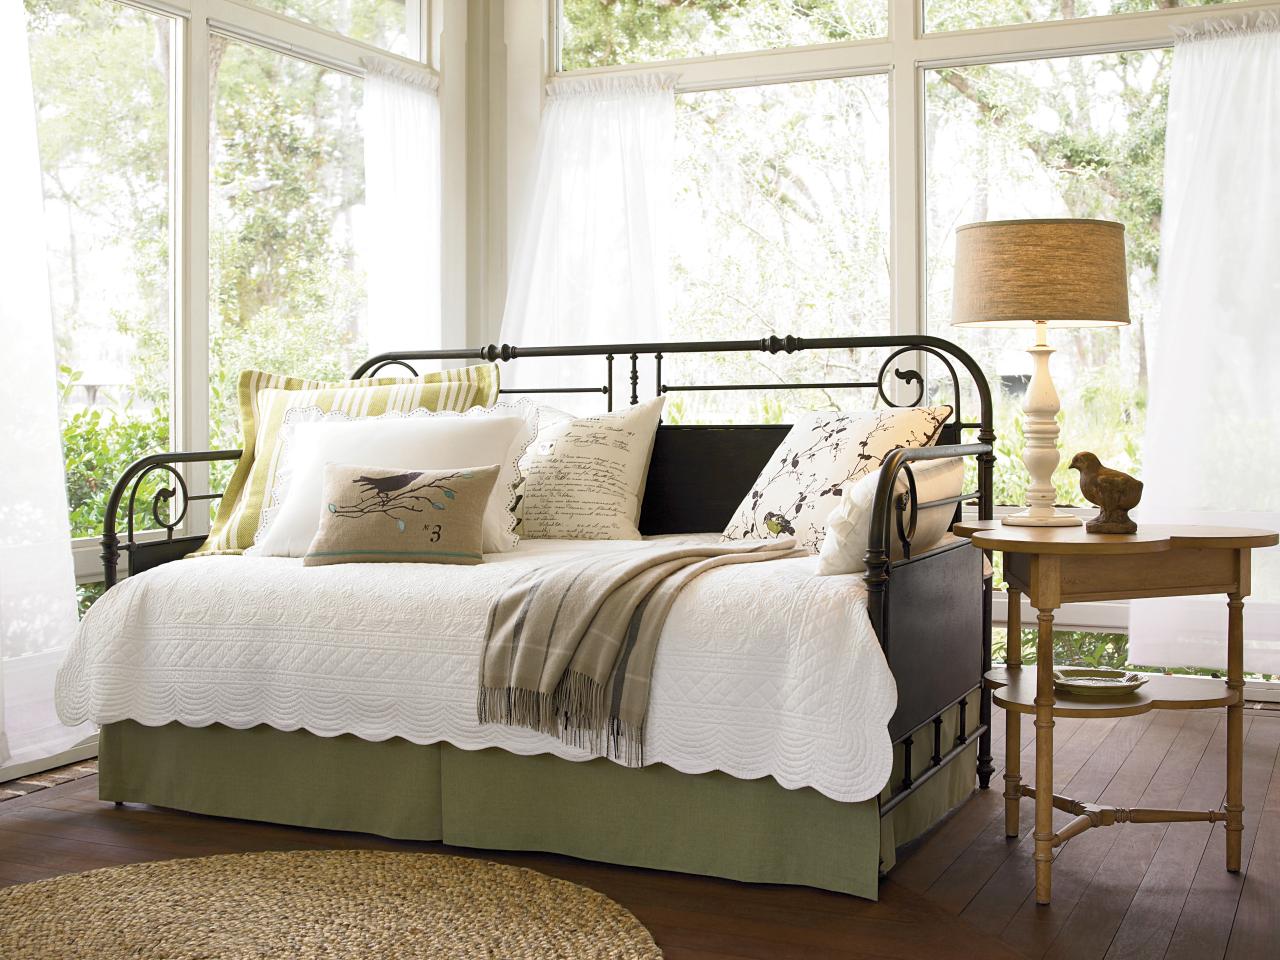 10 Dreamy Daybeds We Adore 